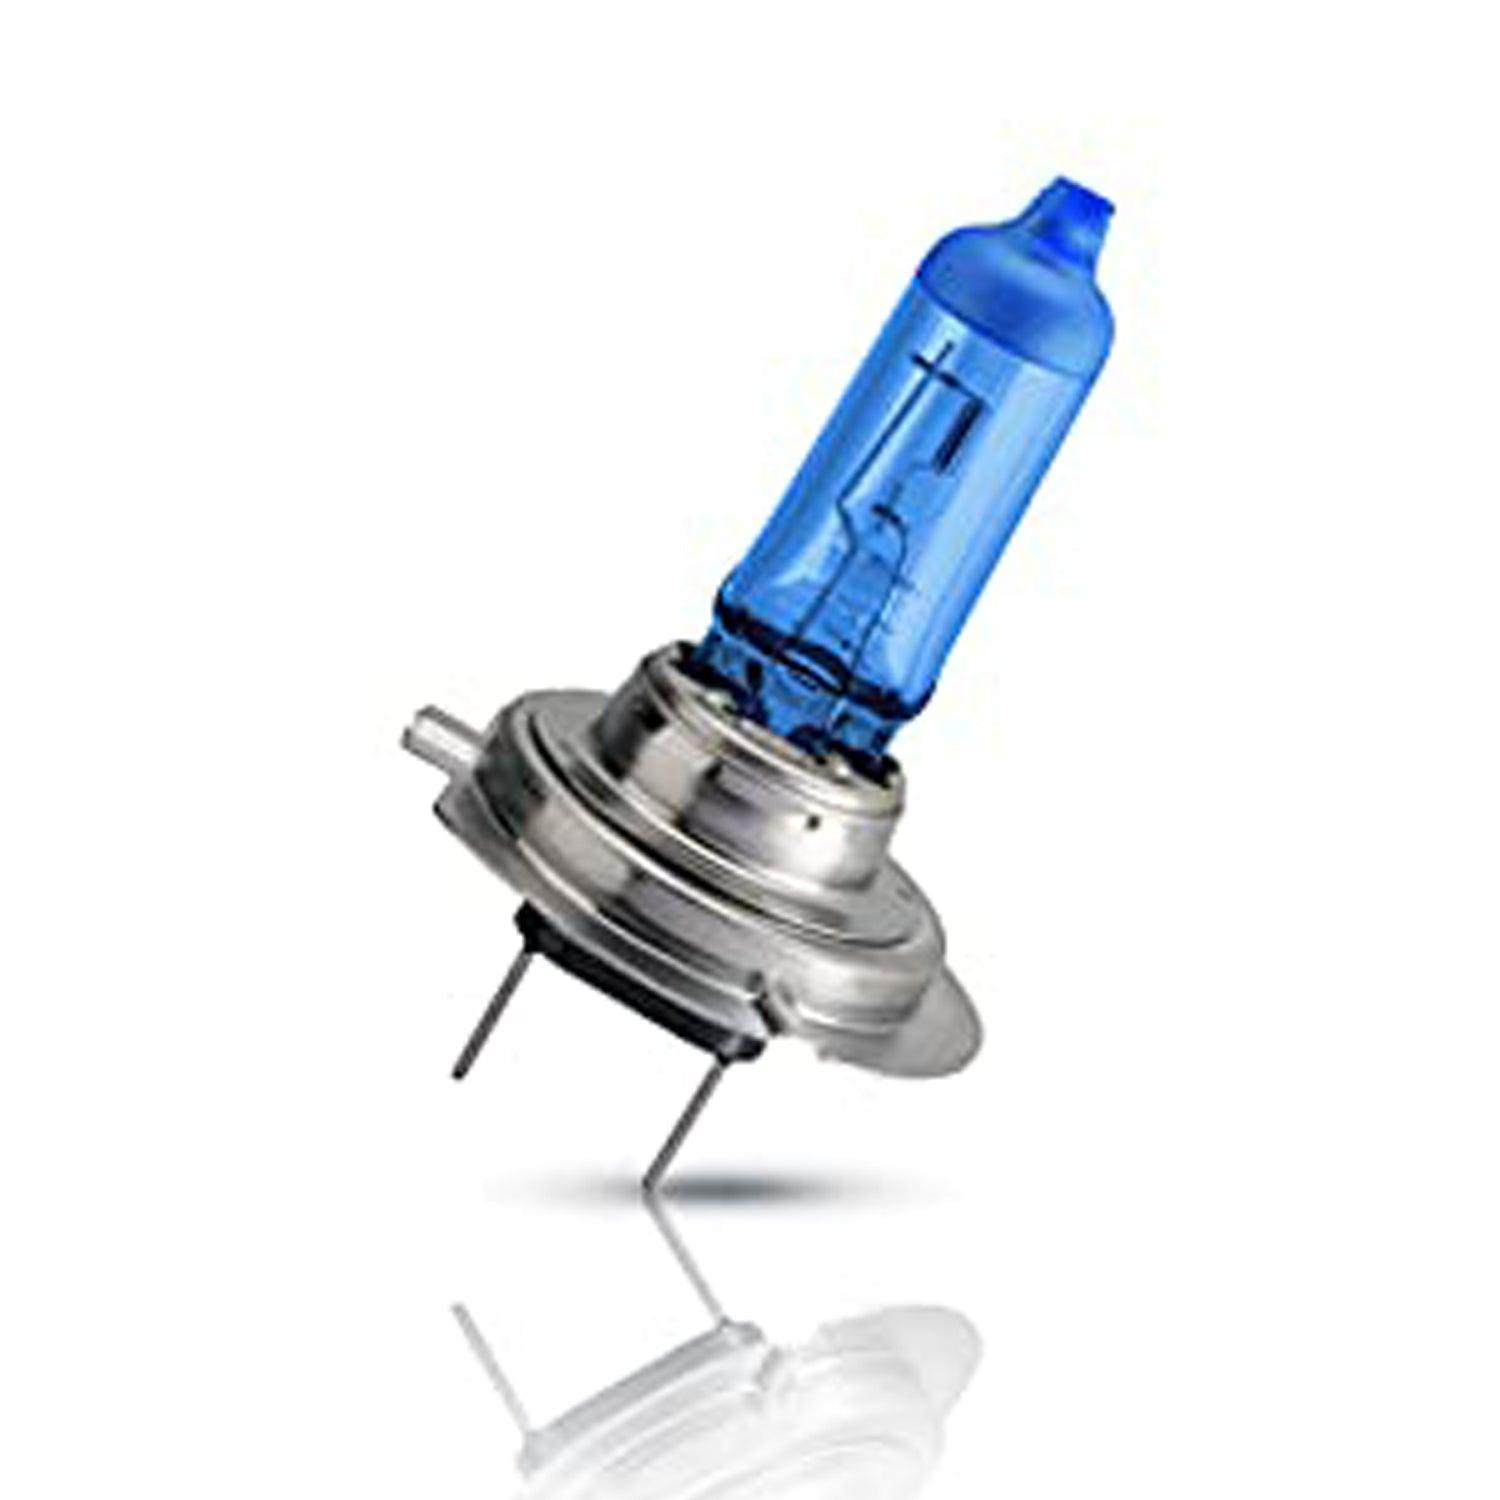 Philips Diamond Vision H7, Replacement Car Bulbs